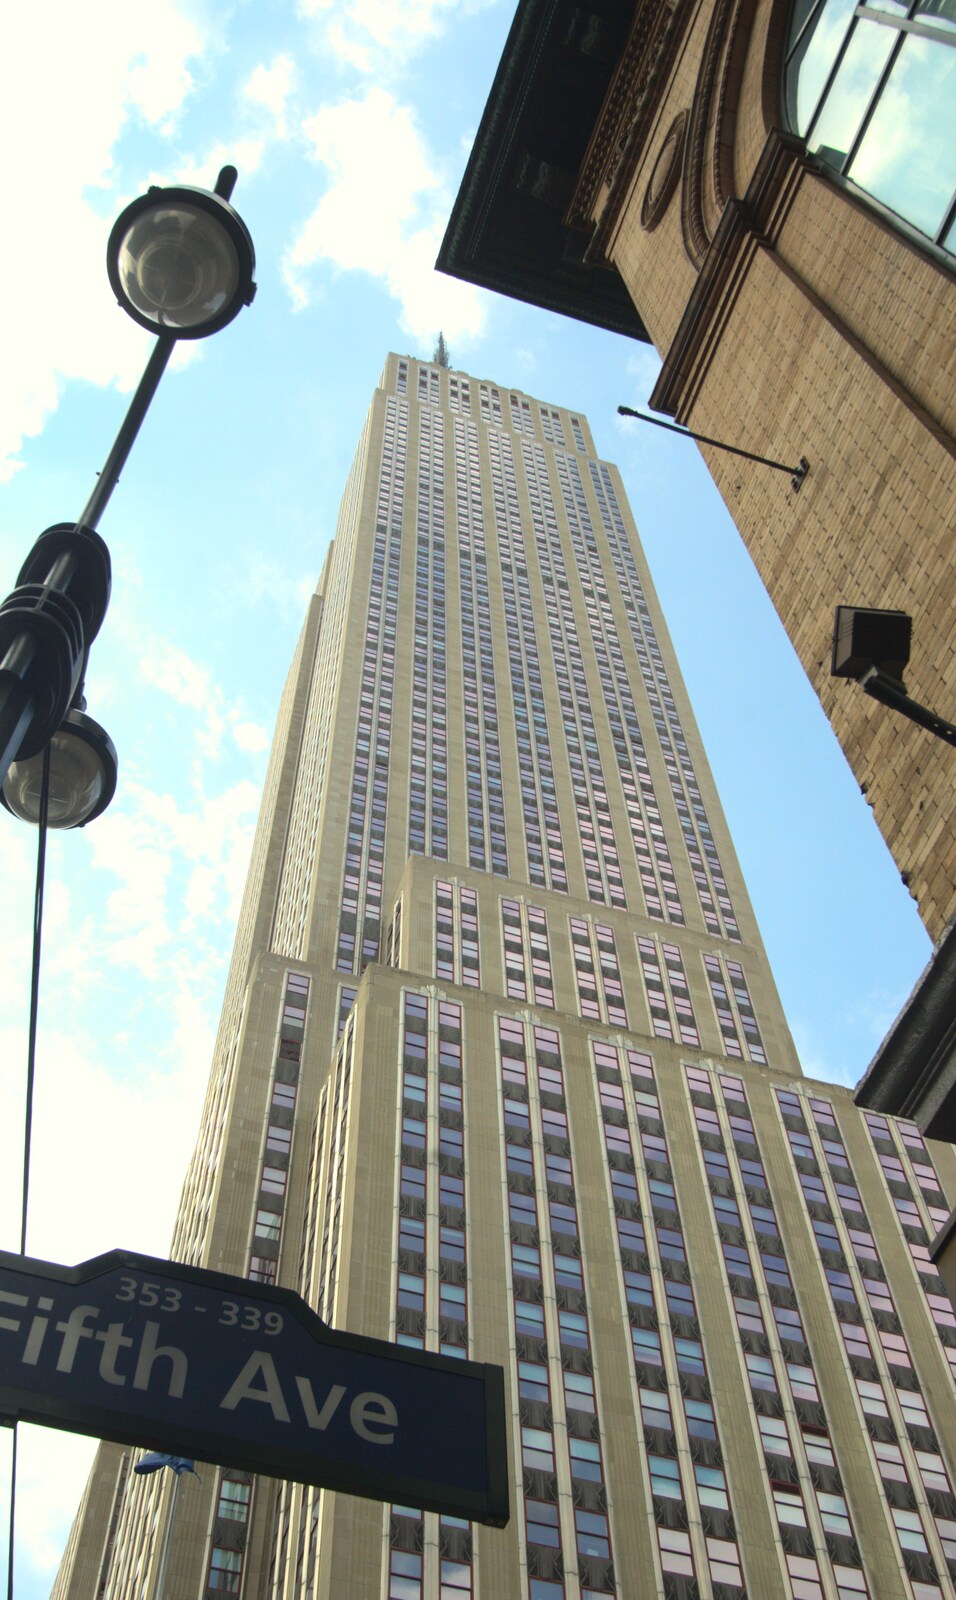 A view of the Empire State Building on 5th Avenue from A Manhattan Hotdog, New York, USA - 21st August 2011